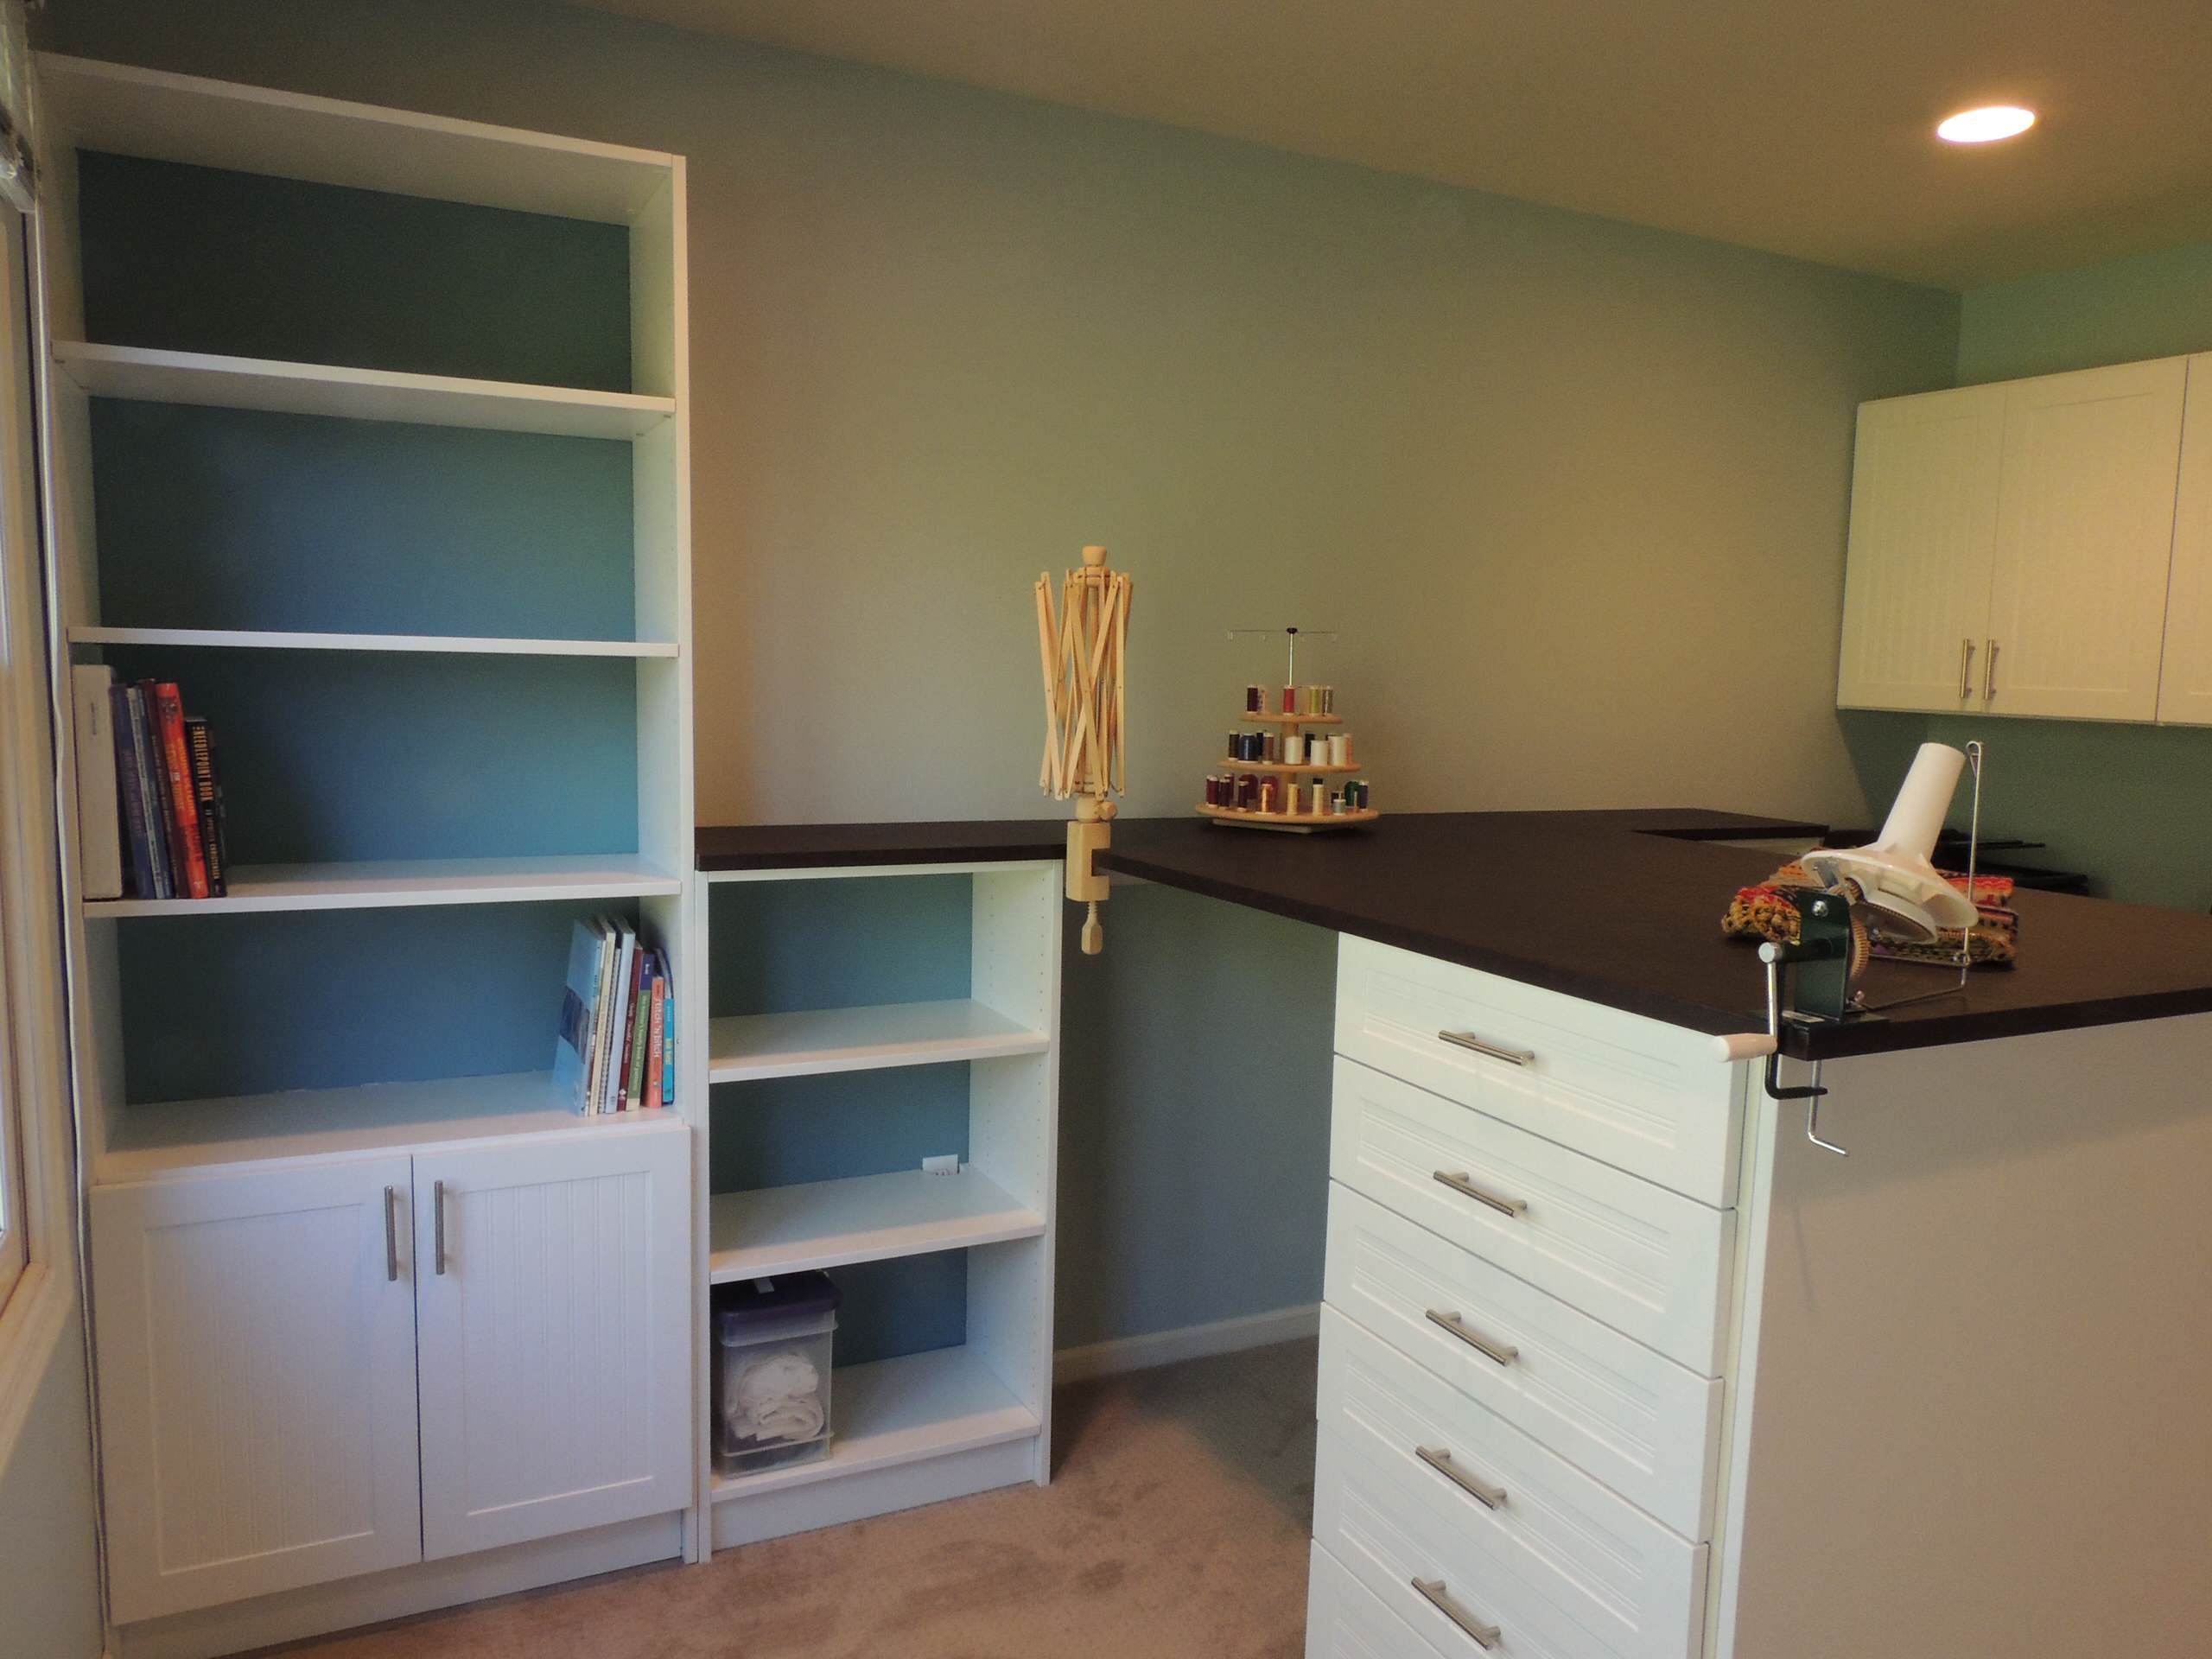 CRAFT ROOM/HOME OFFICE